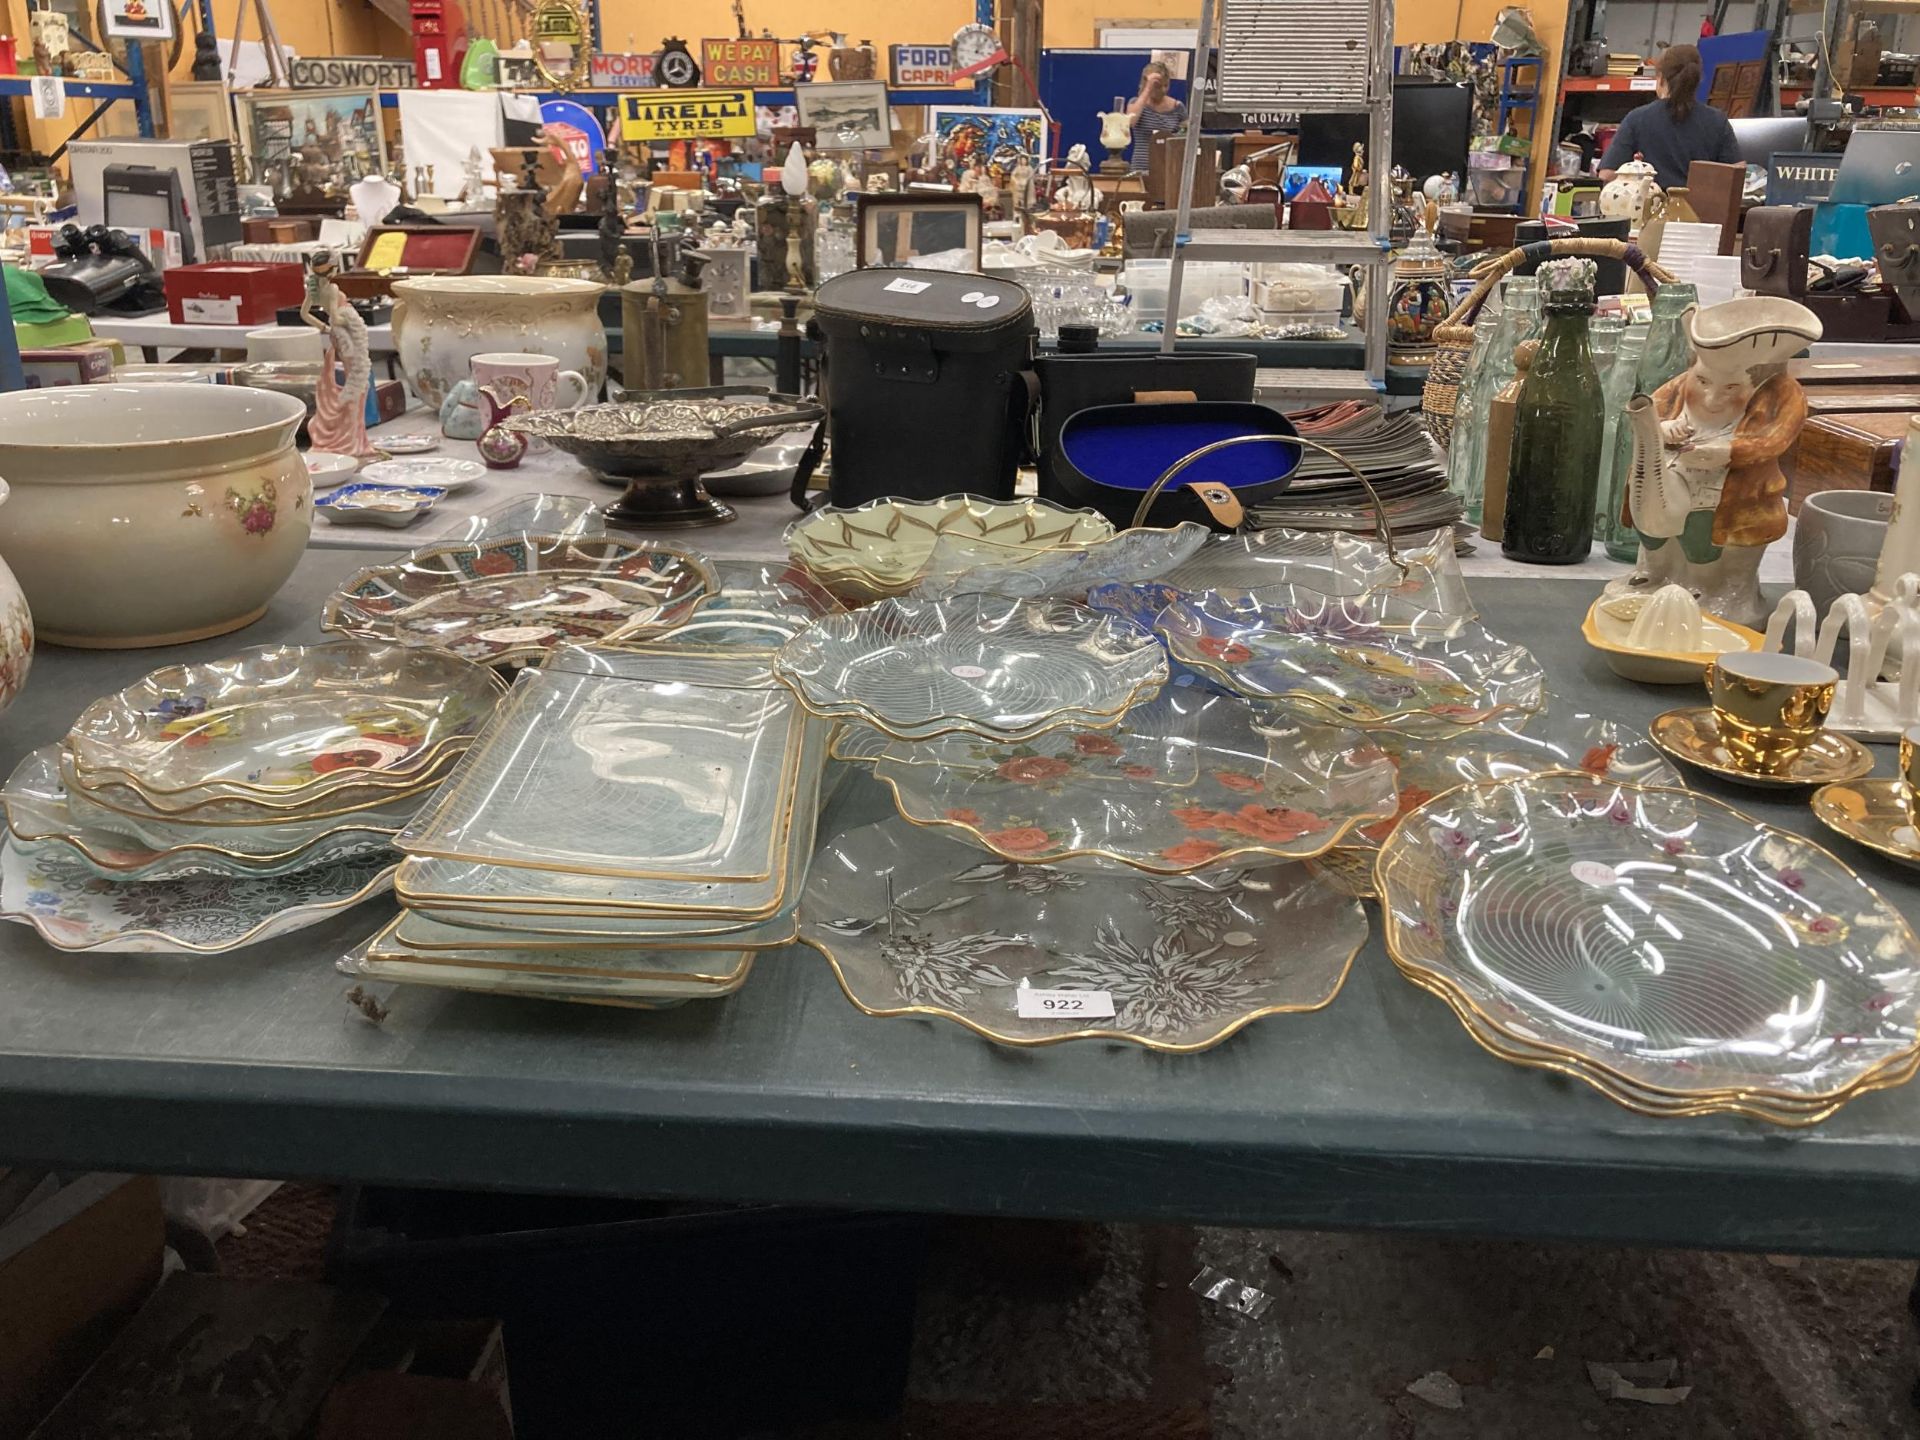 A LARGE QUANTITY OF PATTERNED GLASSWARE PLATES AND SANDWICH TRAYS, ETC - Image 5 of 7